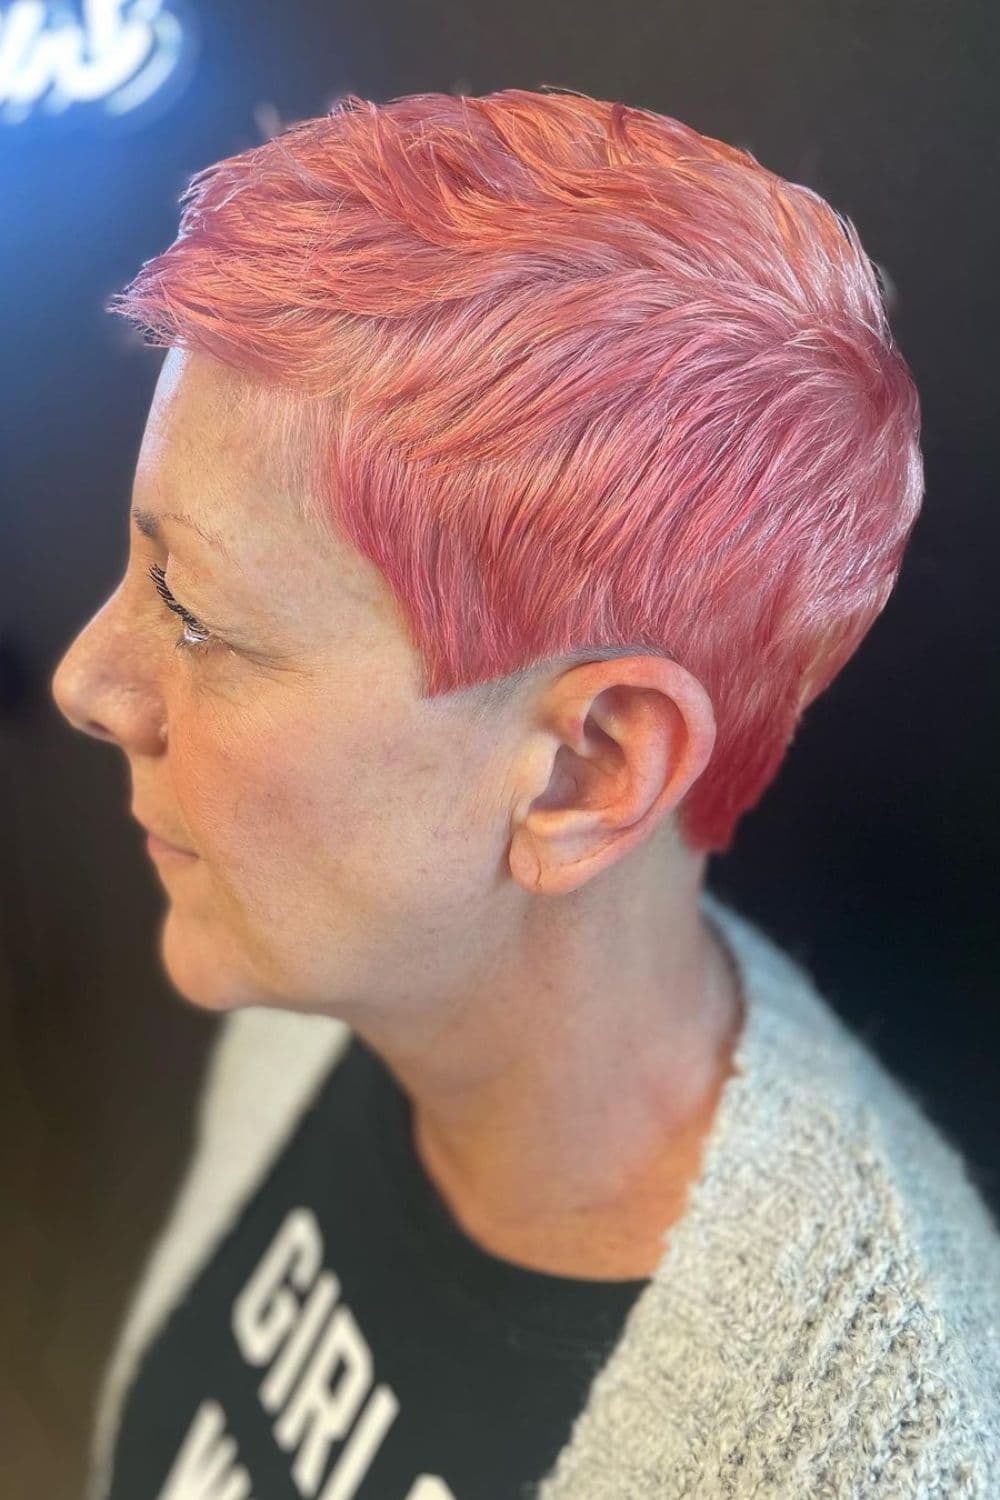 A woman with a pink side-parted textured pixie cut.